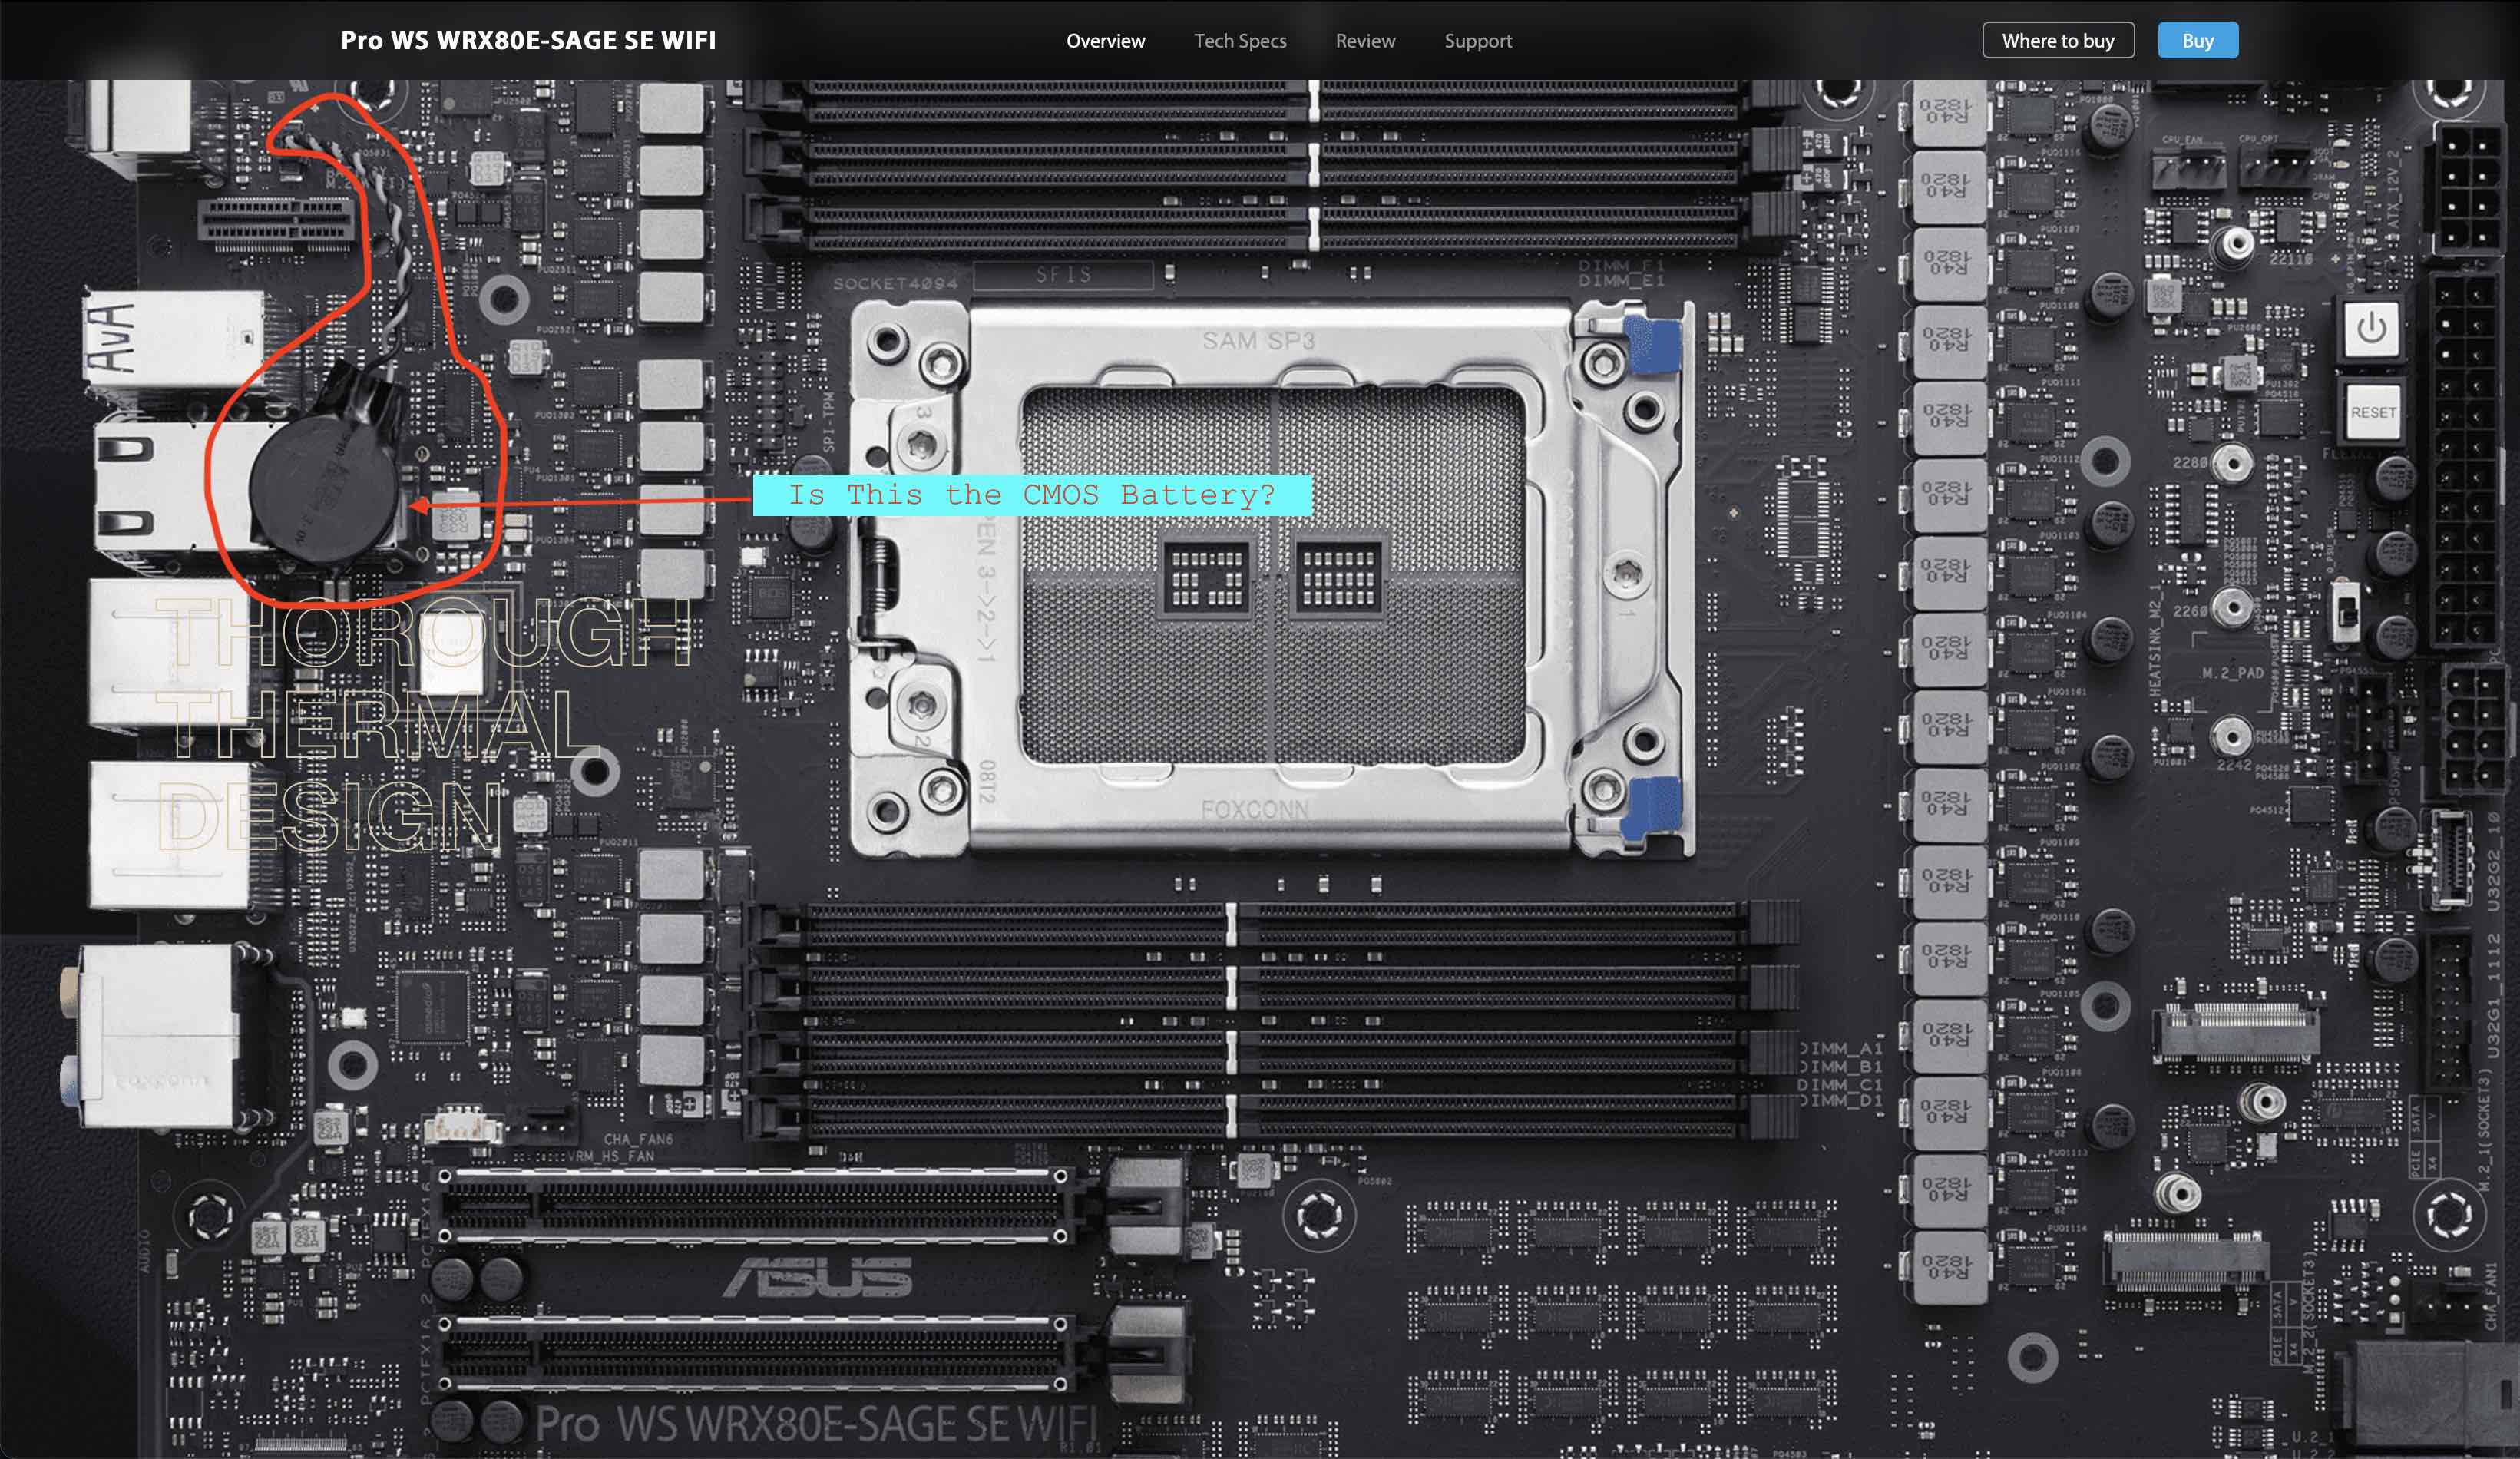 Asus WRX80 loading device drivers in windows setup - Motherboards -  Level1Techs Forums